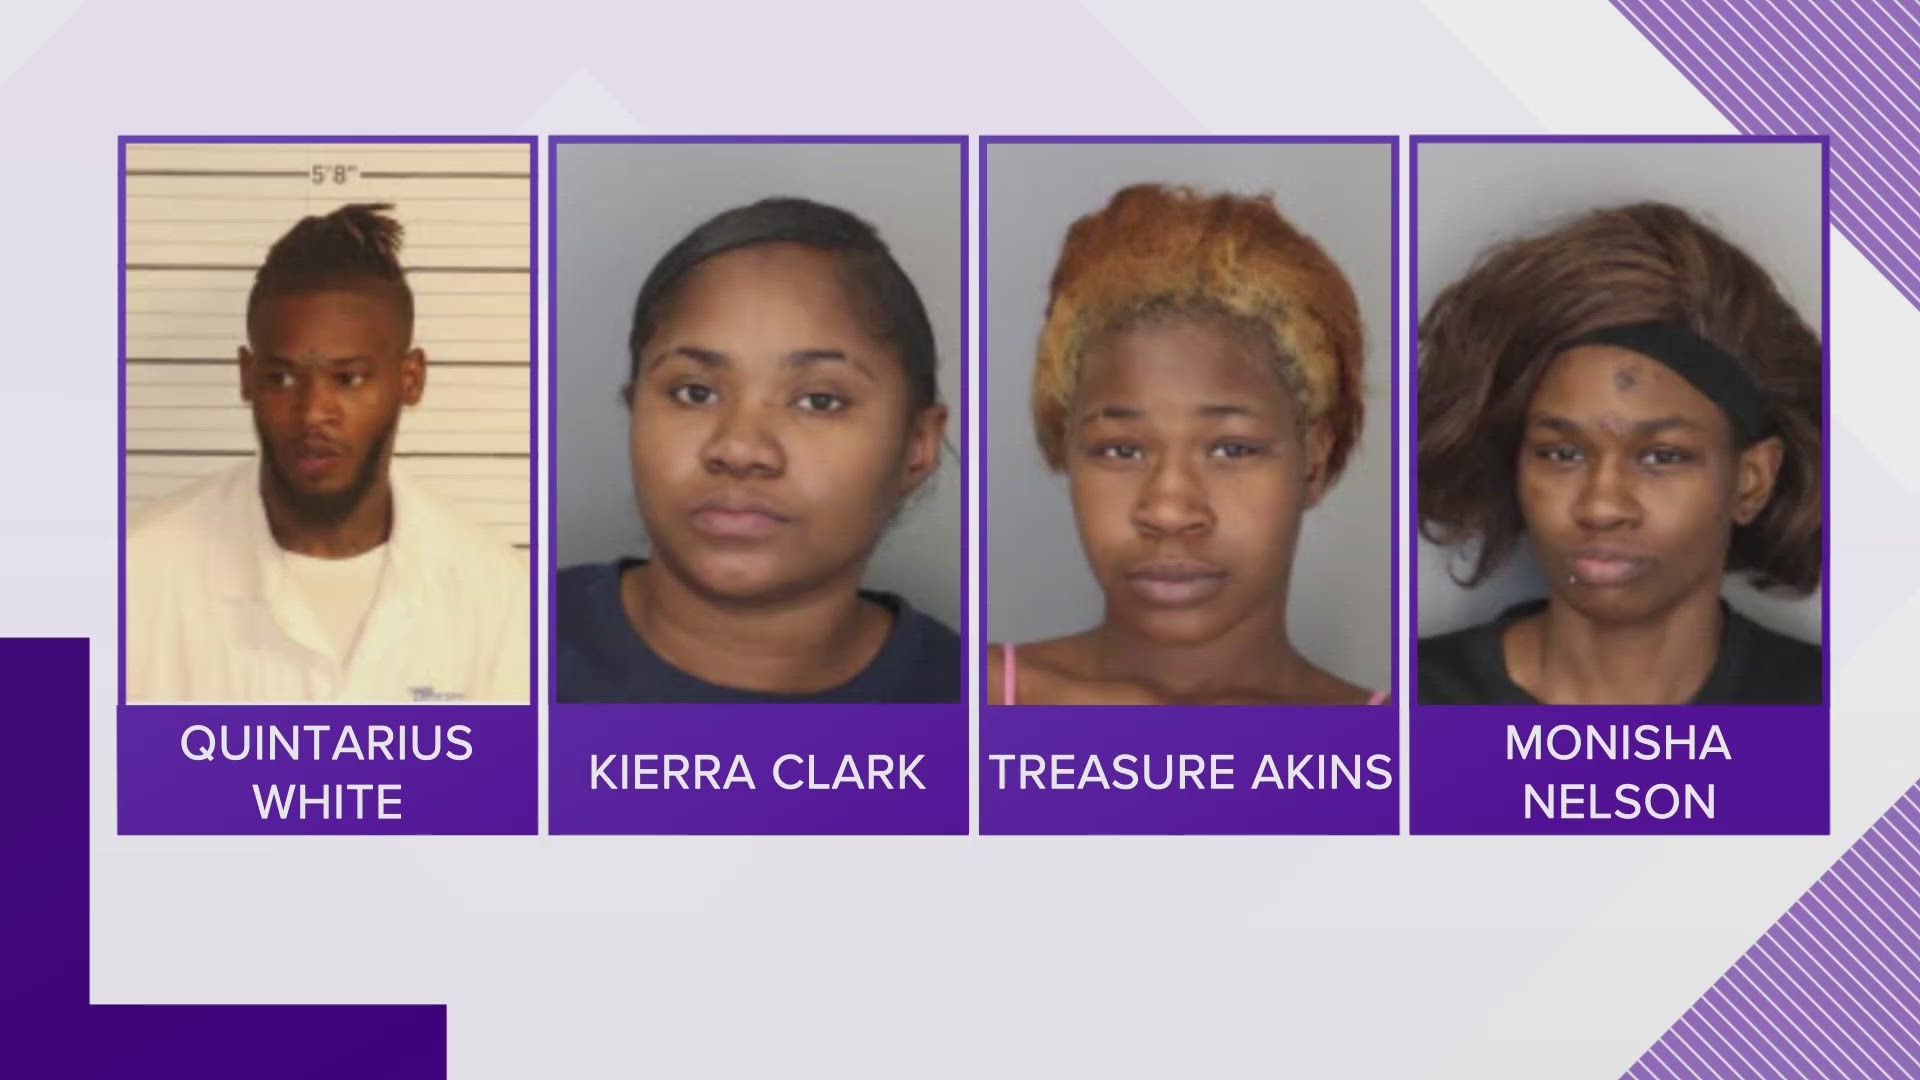 Memphis police said they've arrested four people in connection to forcing women into sex trafficking as well as kidnapping charges.